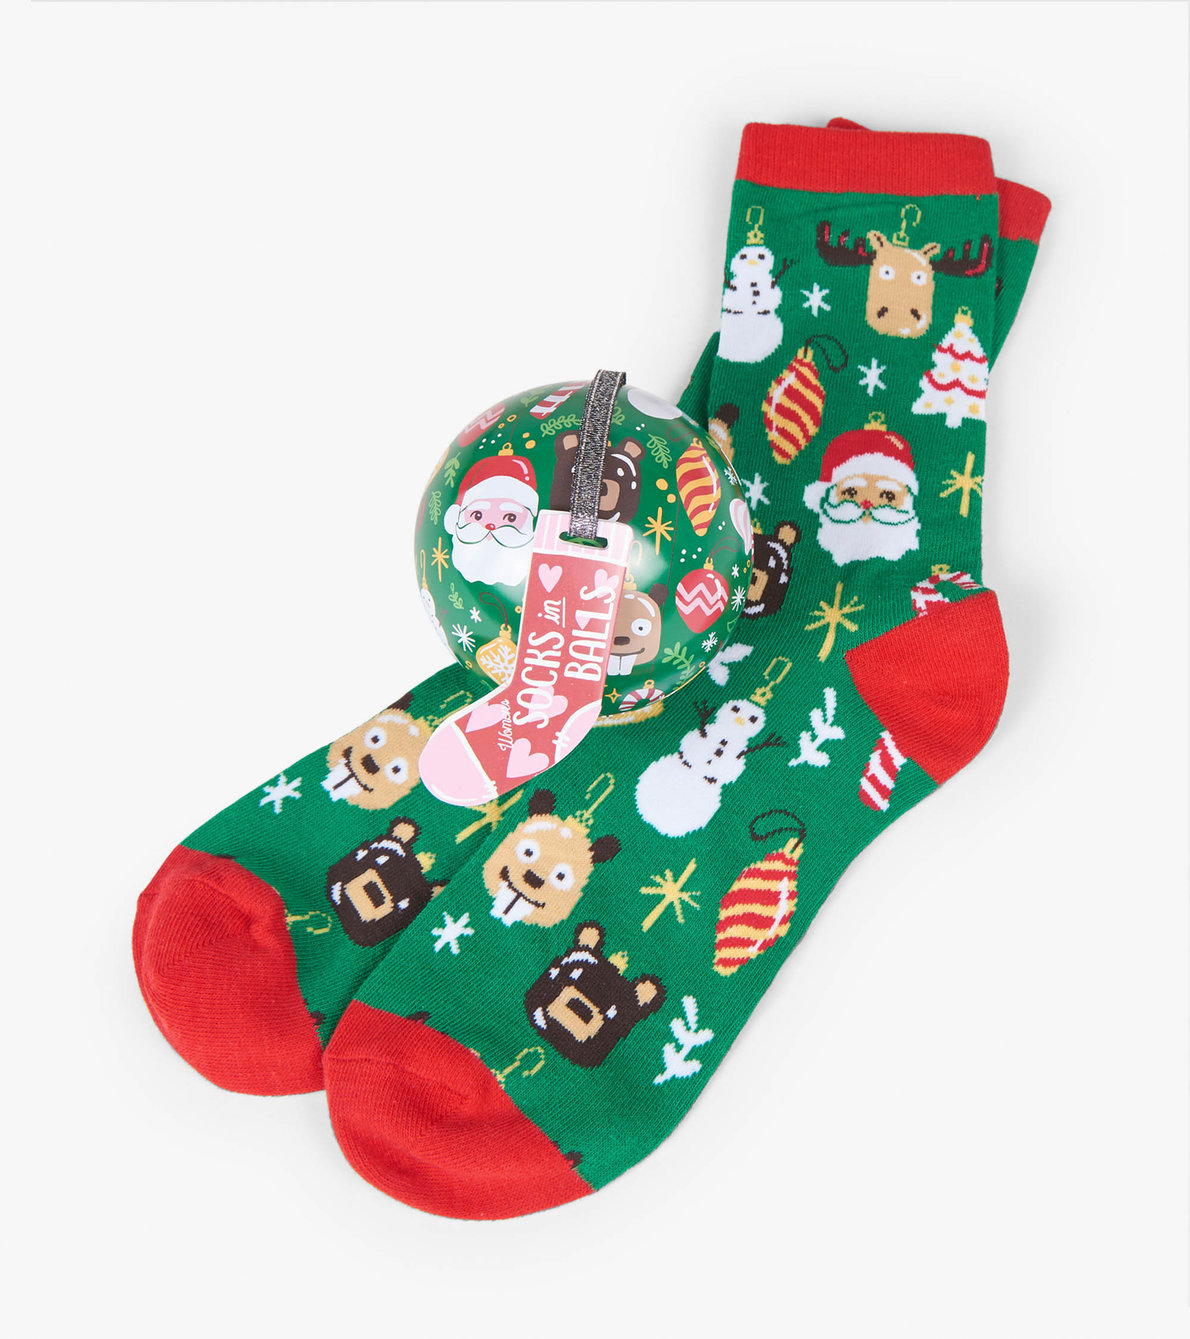 View larger image of Holiday Ornaments Women's Socks in Balls